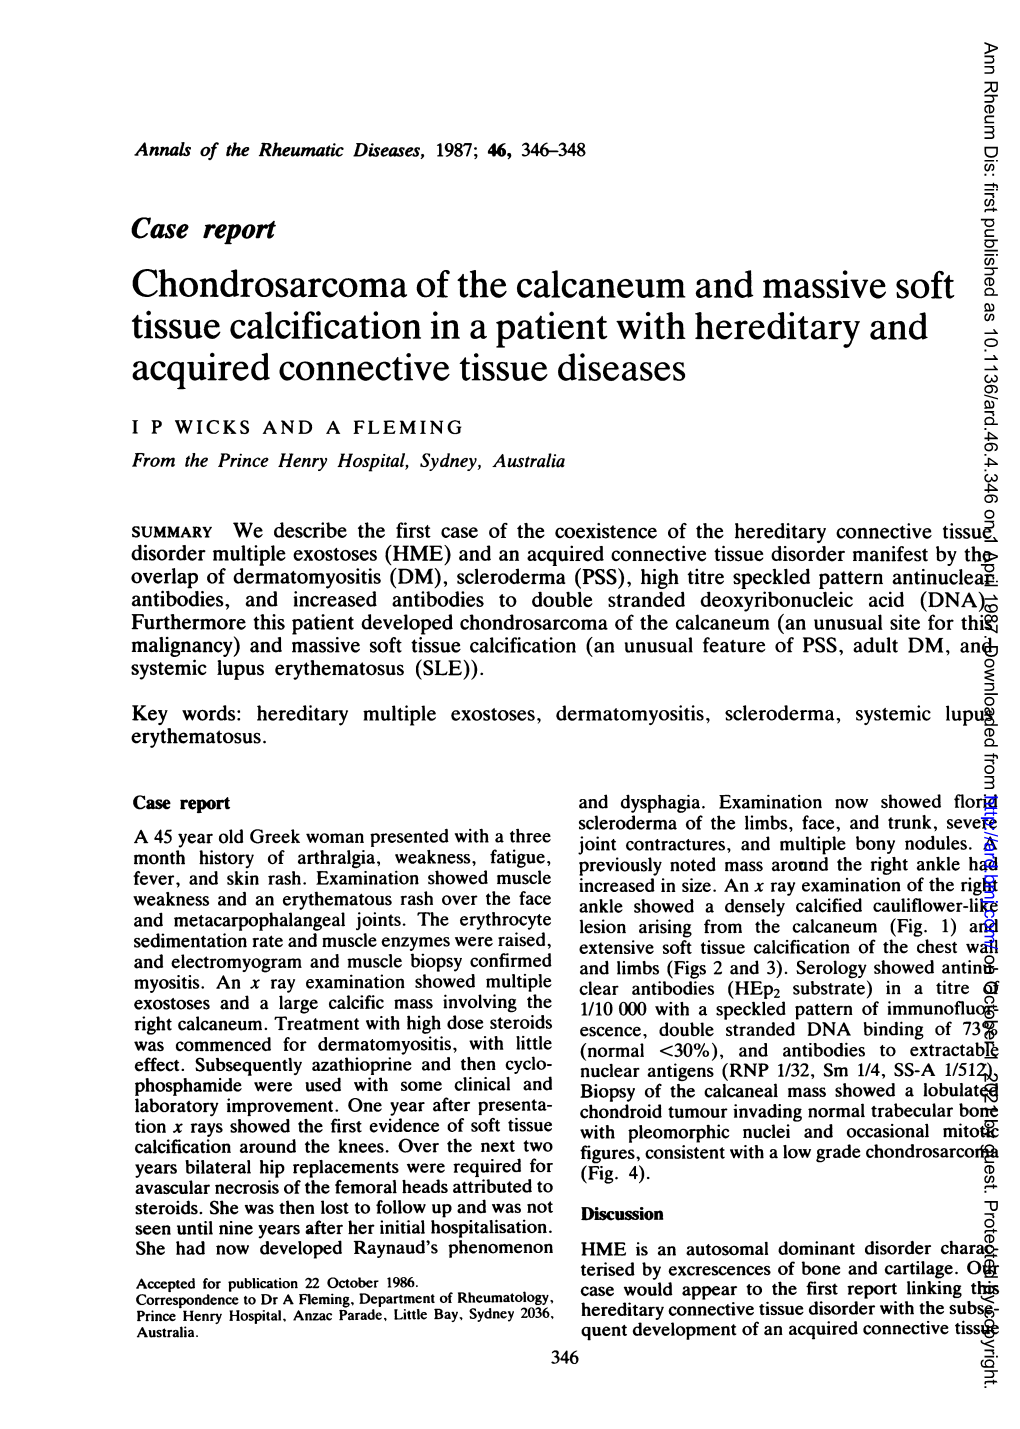 Acquired Connective Tissue Diseases